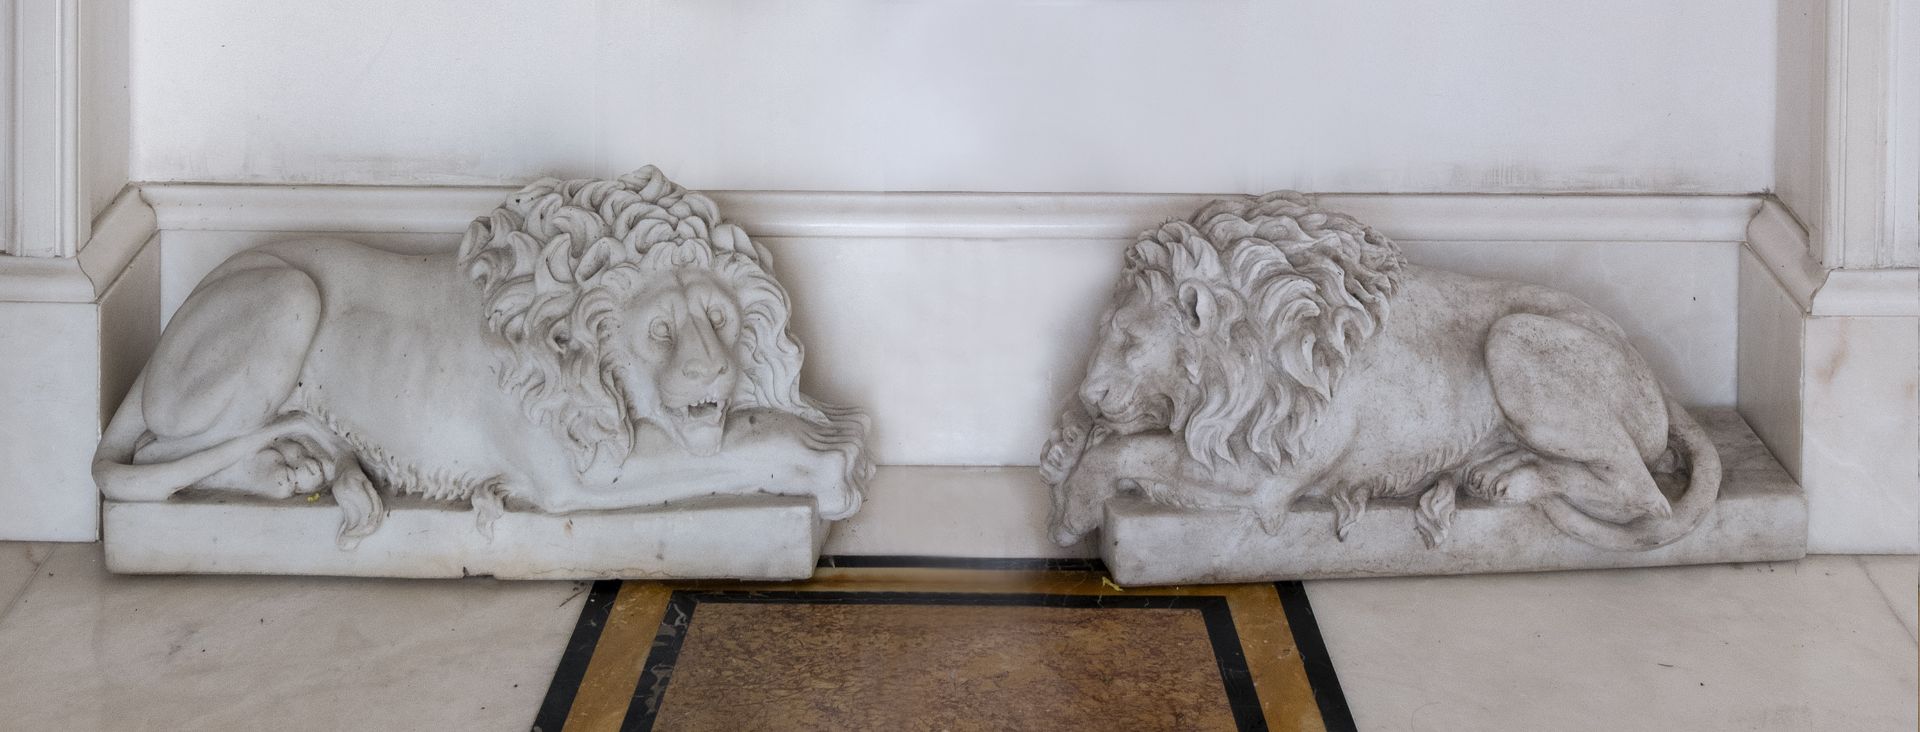 PAIR OF WHITE MARBLE SCULPTURES 20TH CENTURY